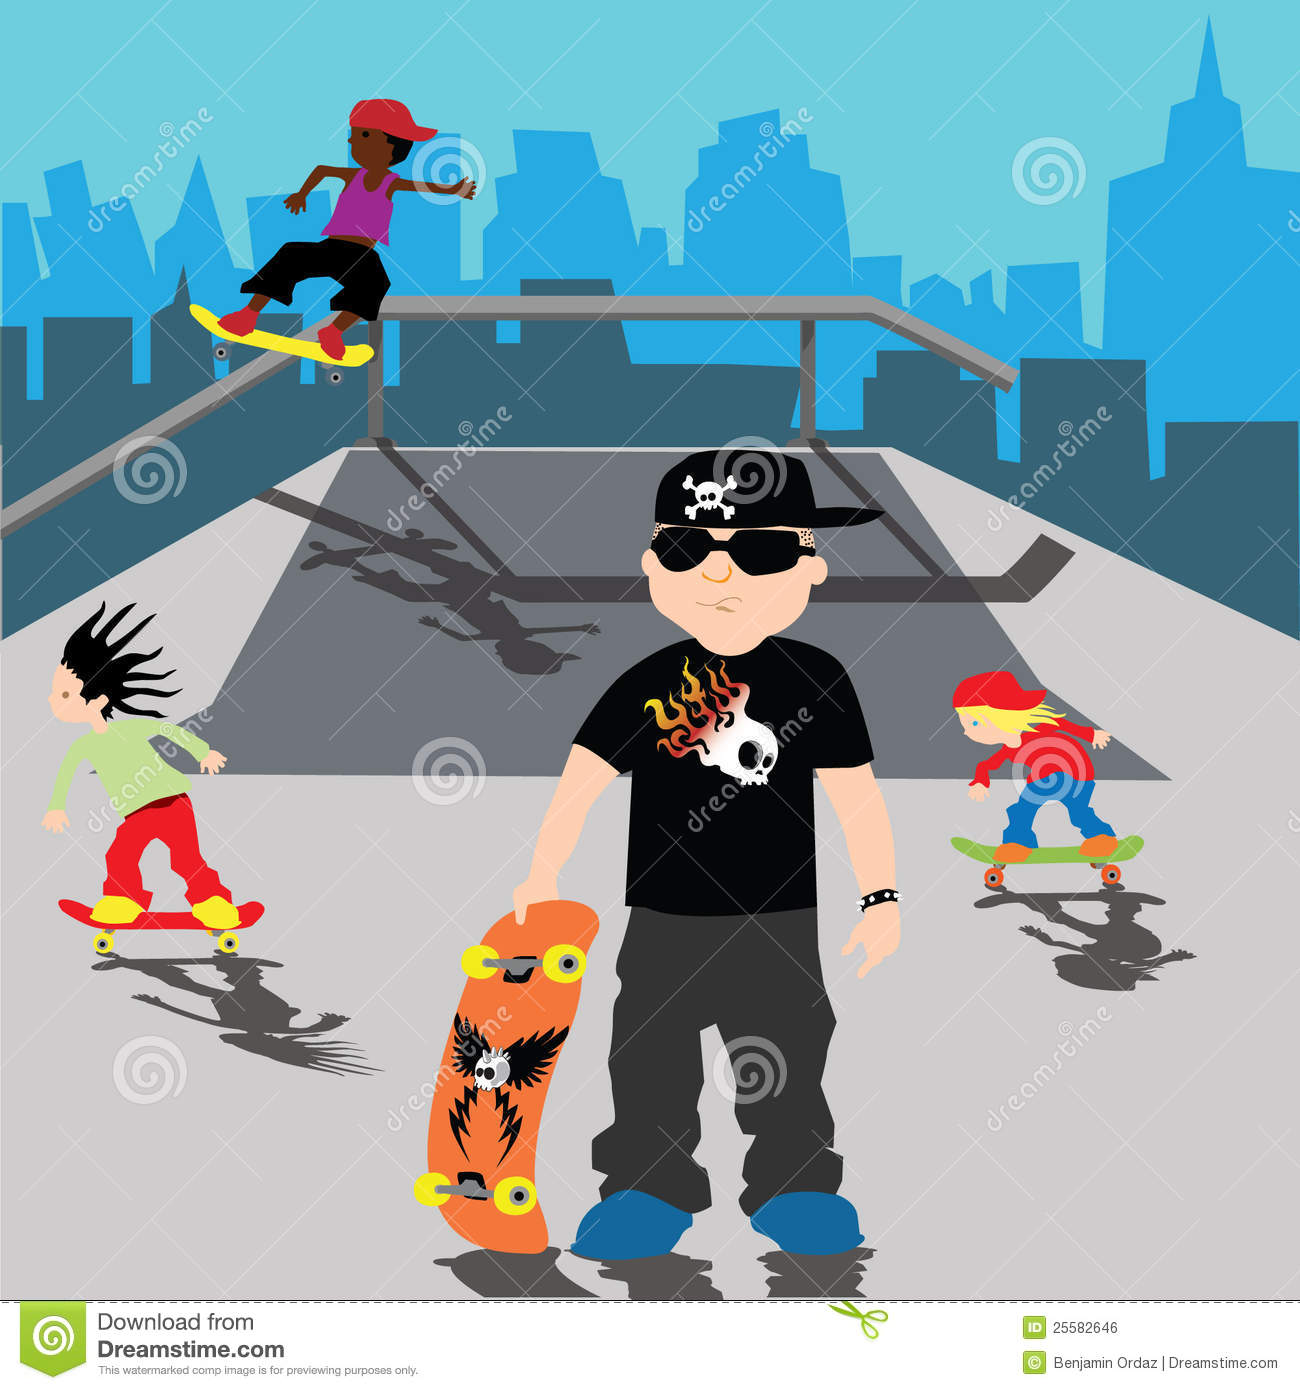 Skater Bully On Skate Park With Kids Playing Over City Background